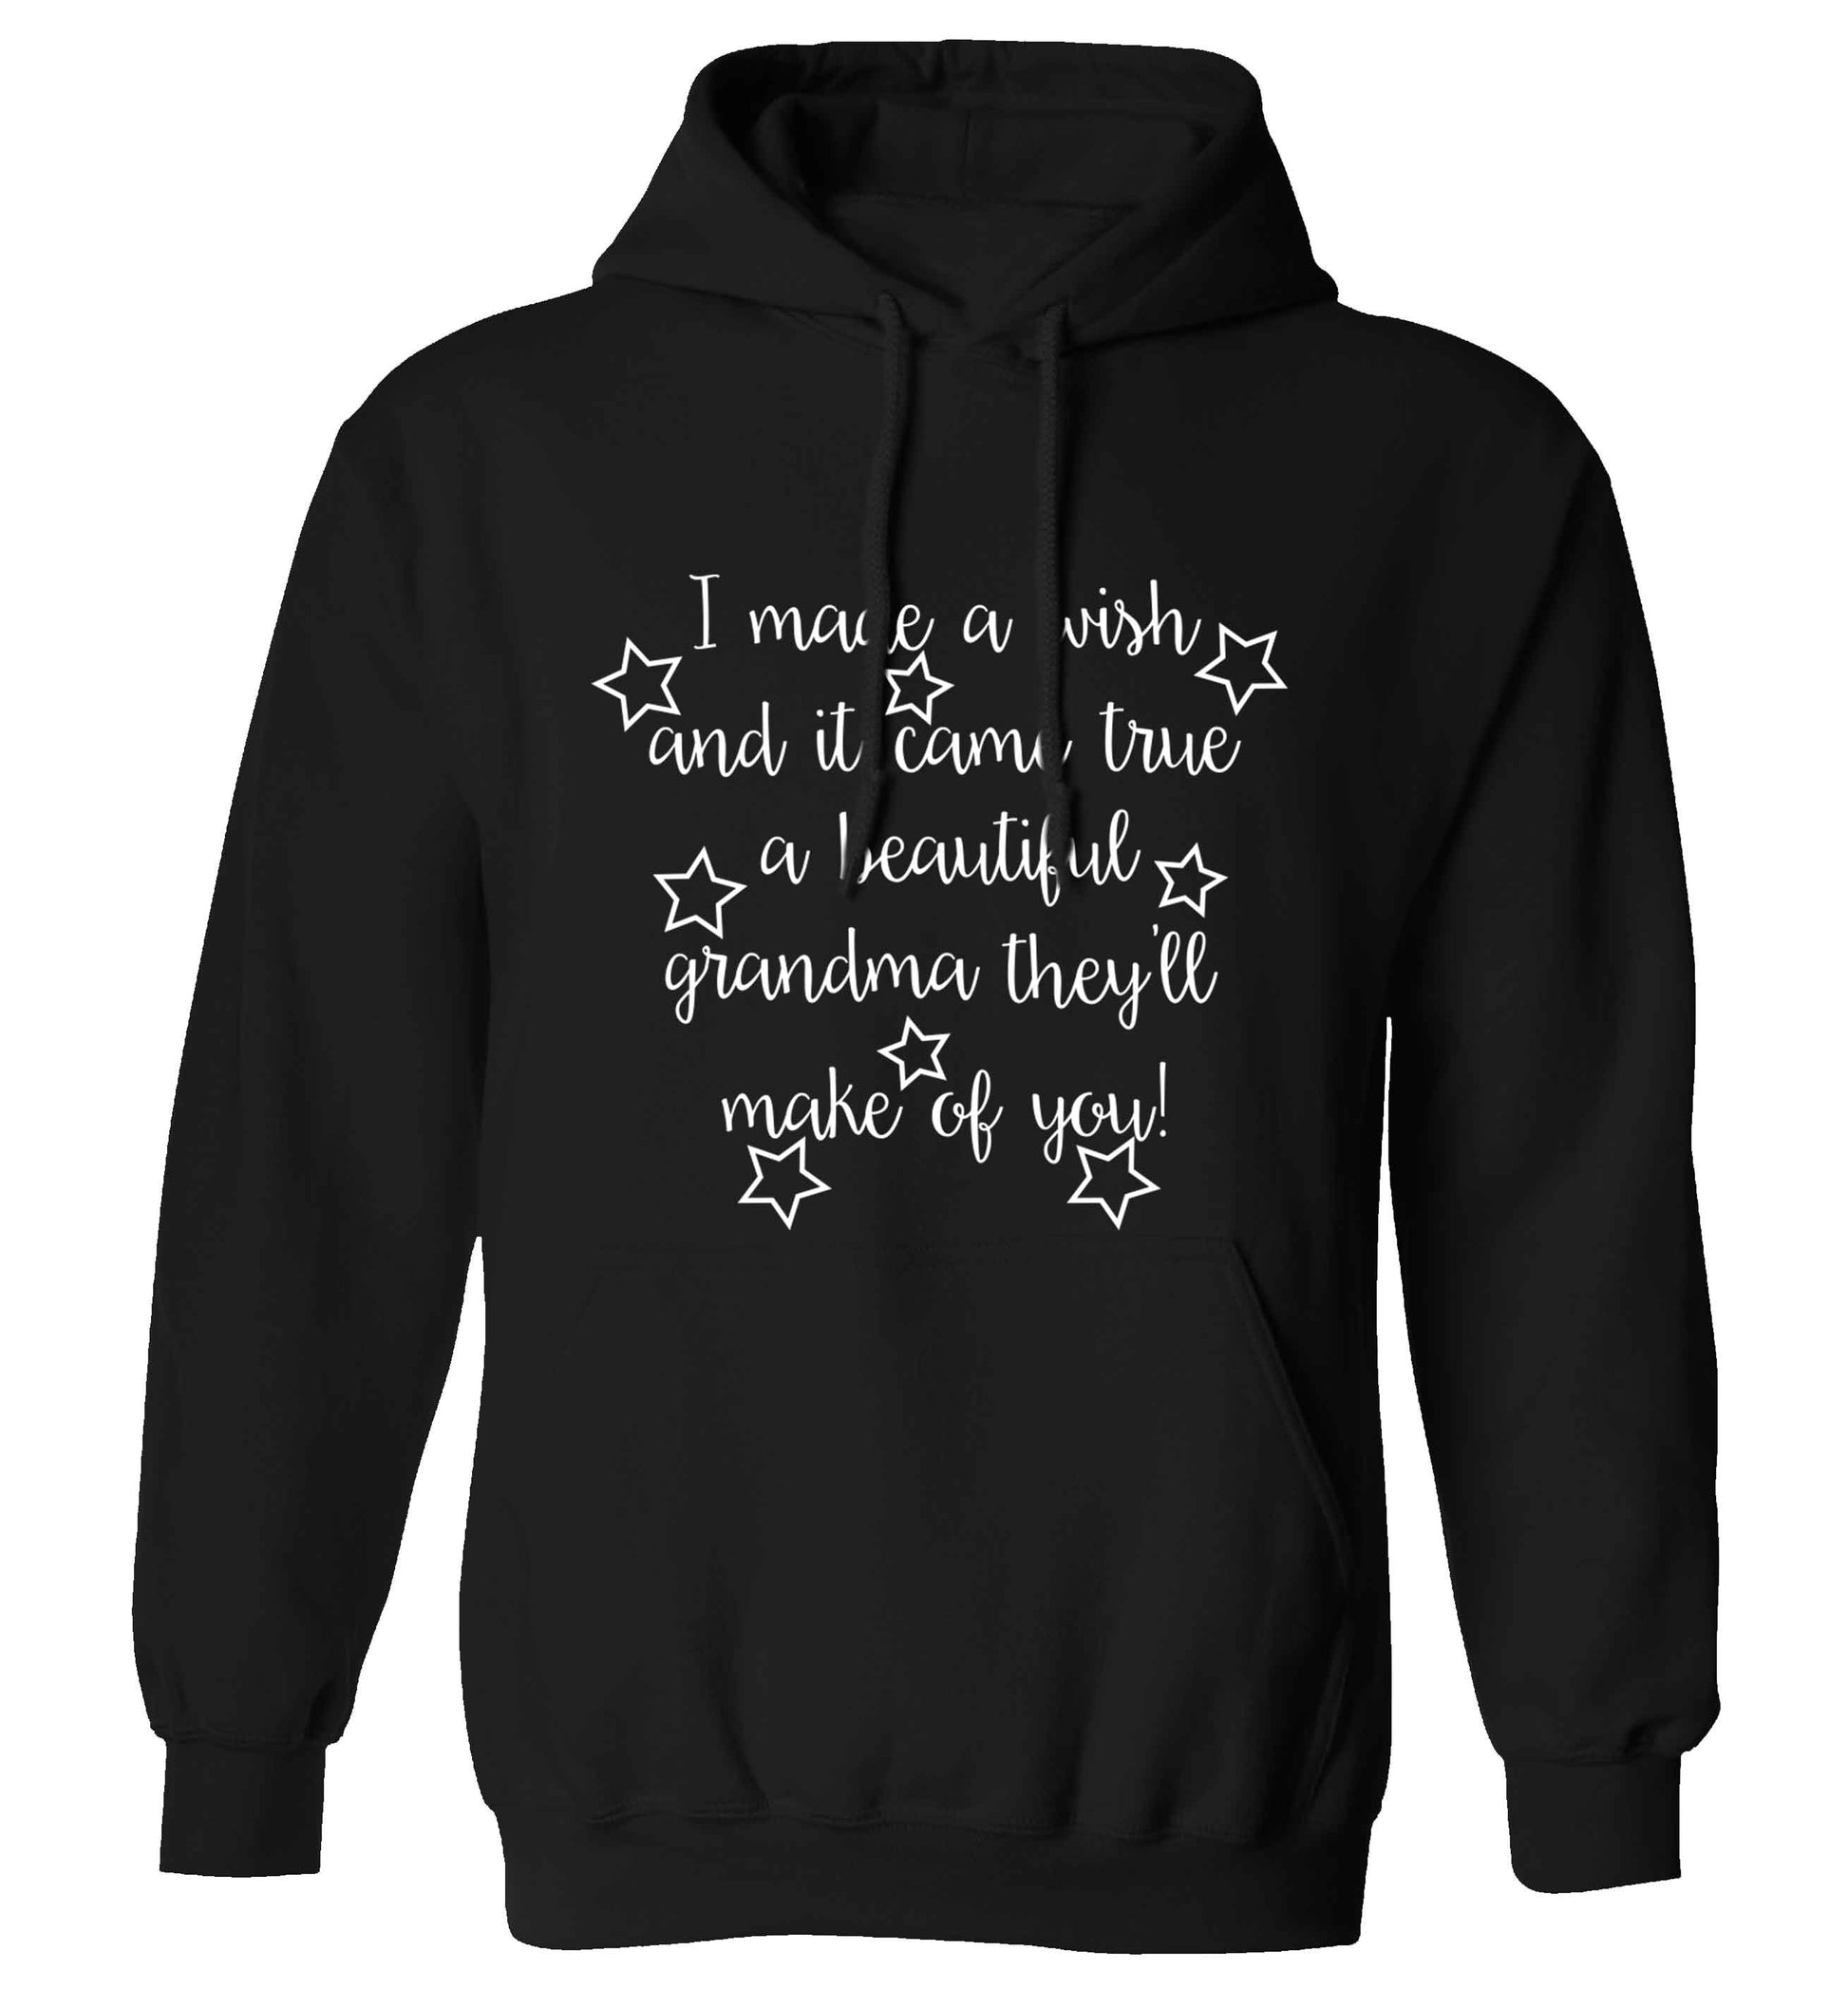 I made a wish and it came true a beautiful grandma they'll make of you! adults unisex black hoodie 2XL